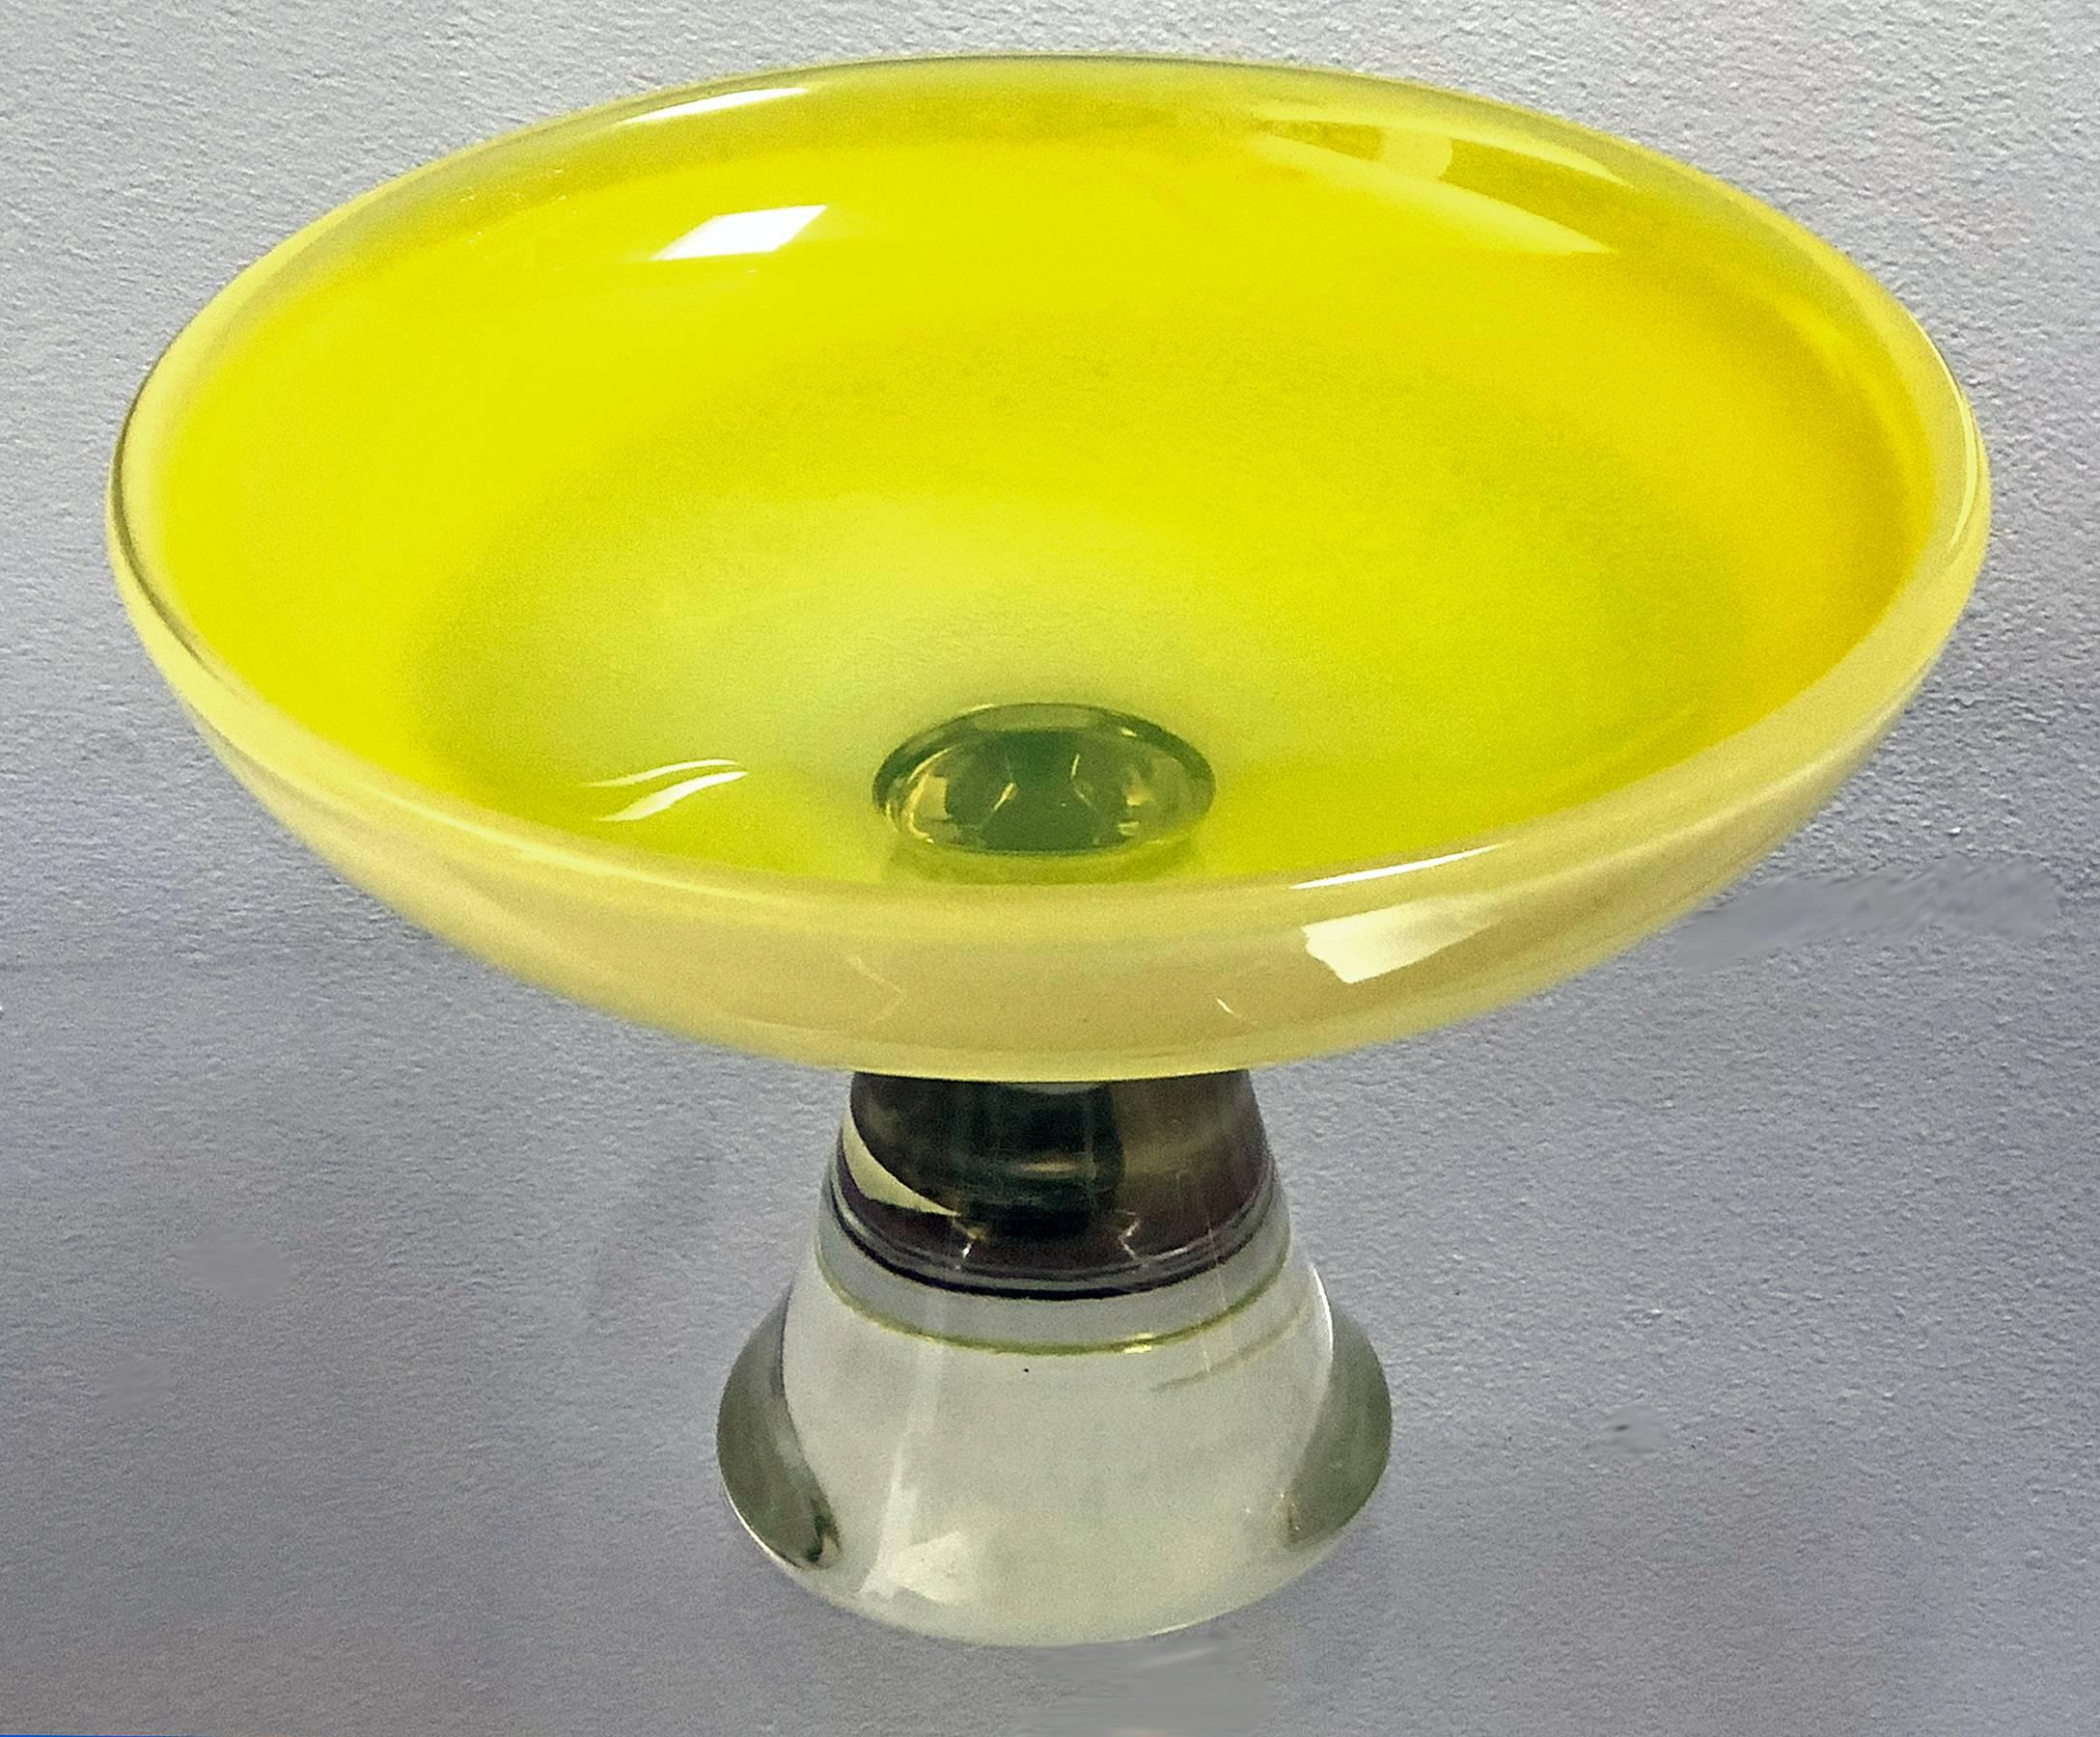 Murano glass. Bright yellow dish and clear glass base.

Complementary delivery in the Los Angeles / Beverly Hills area/ Pasadena. Pick up is also an option.
